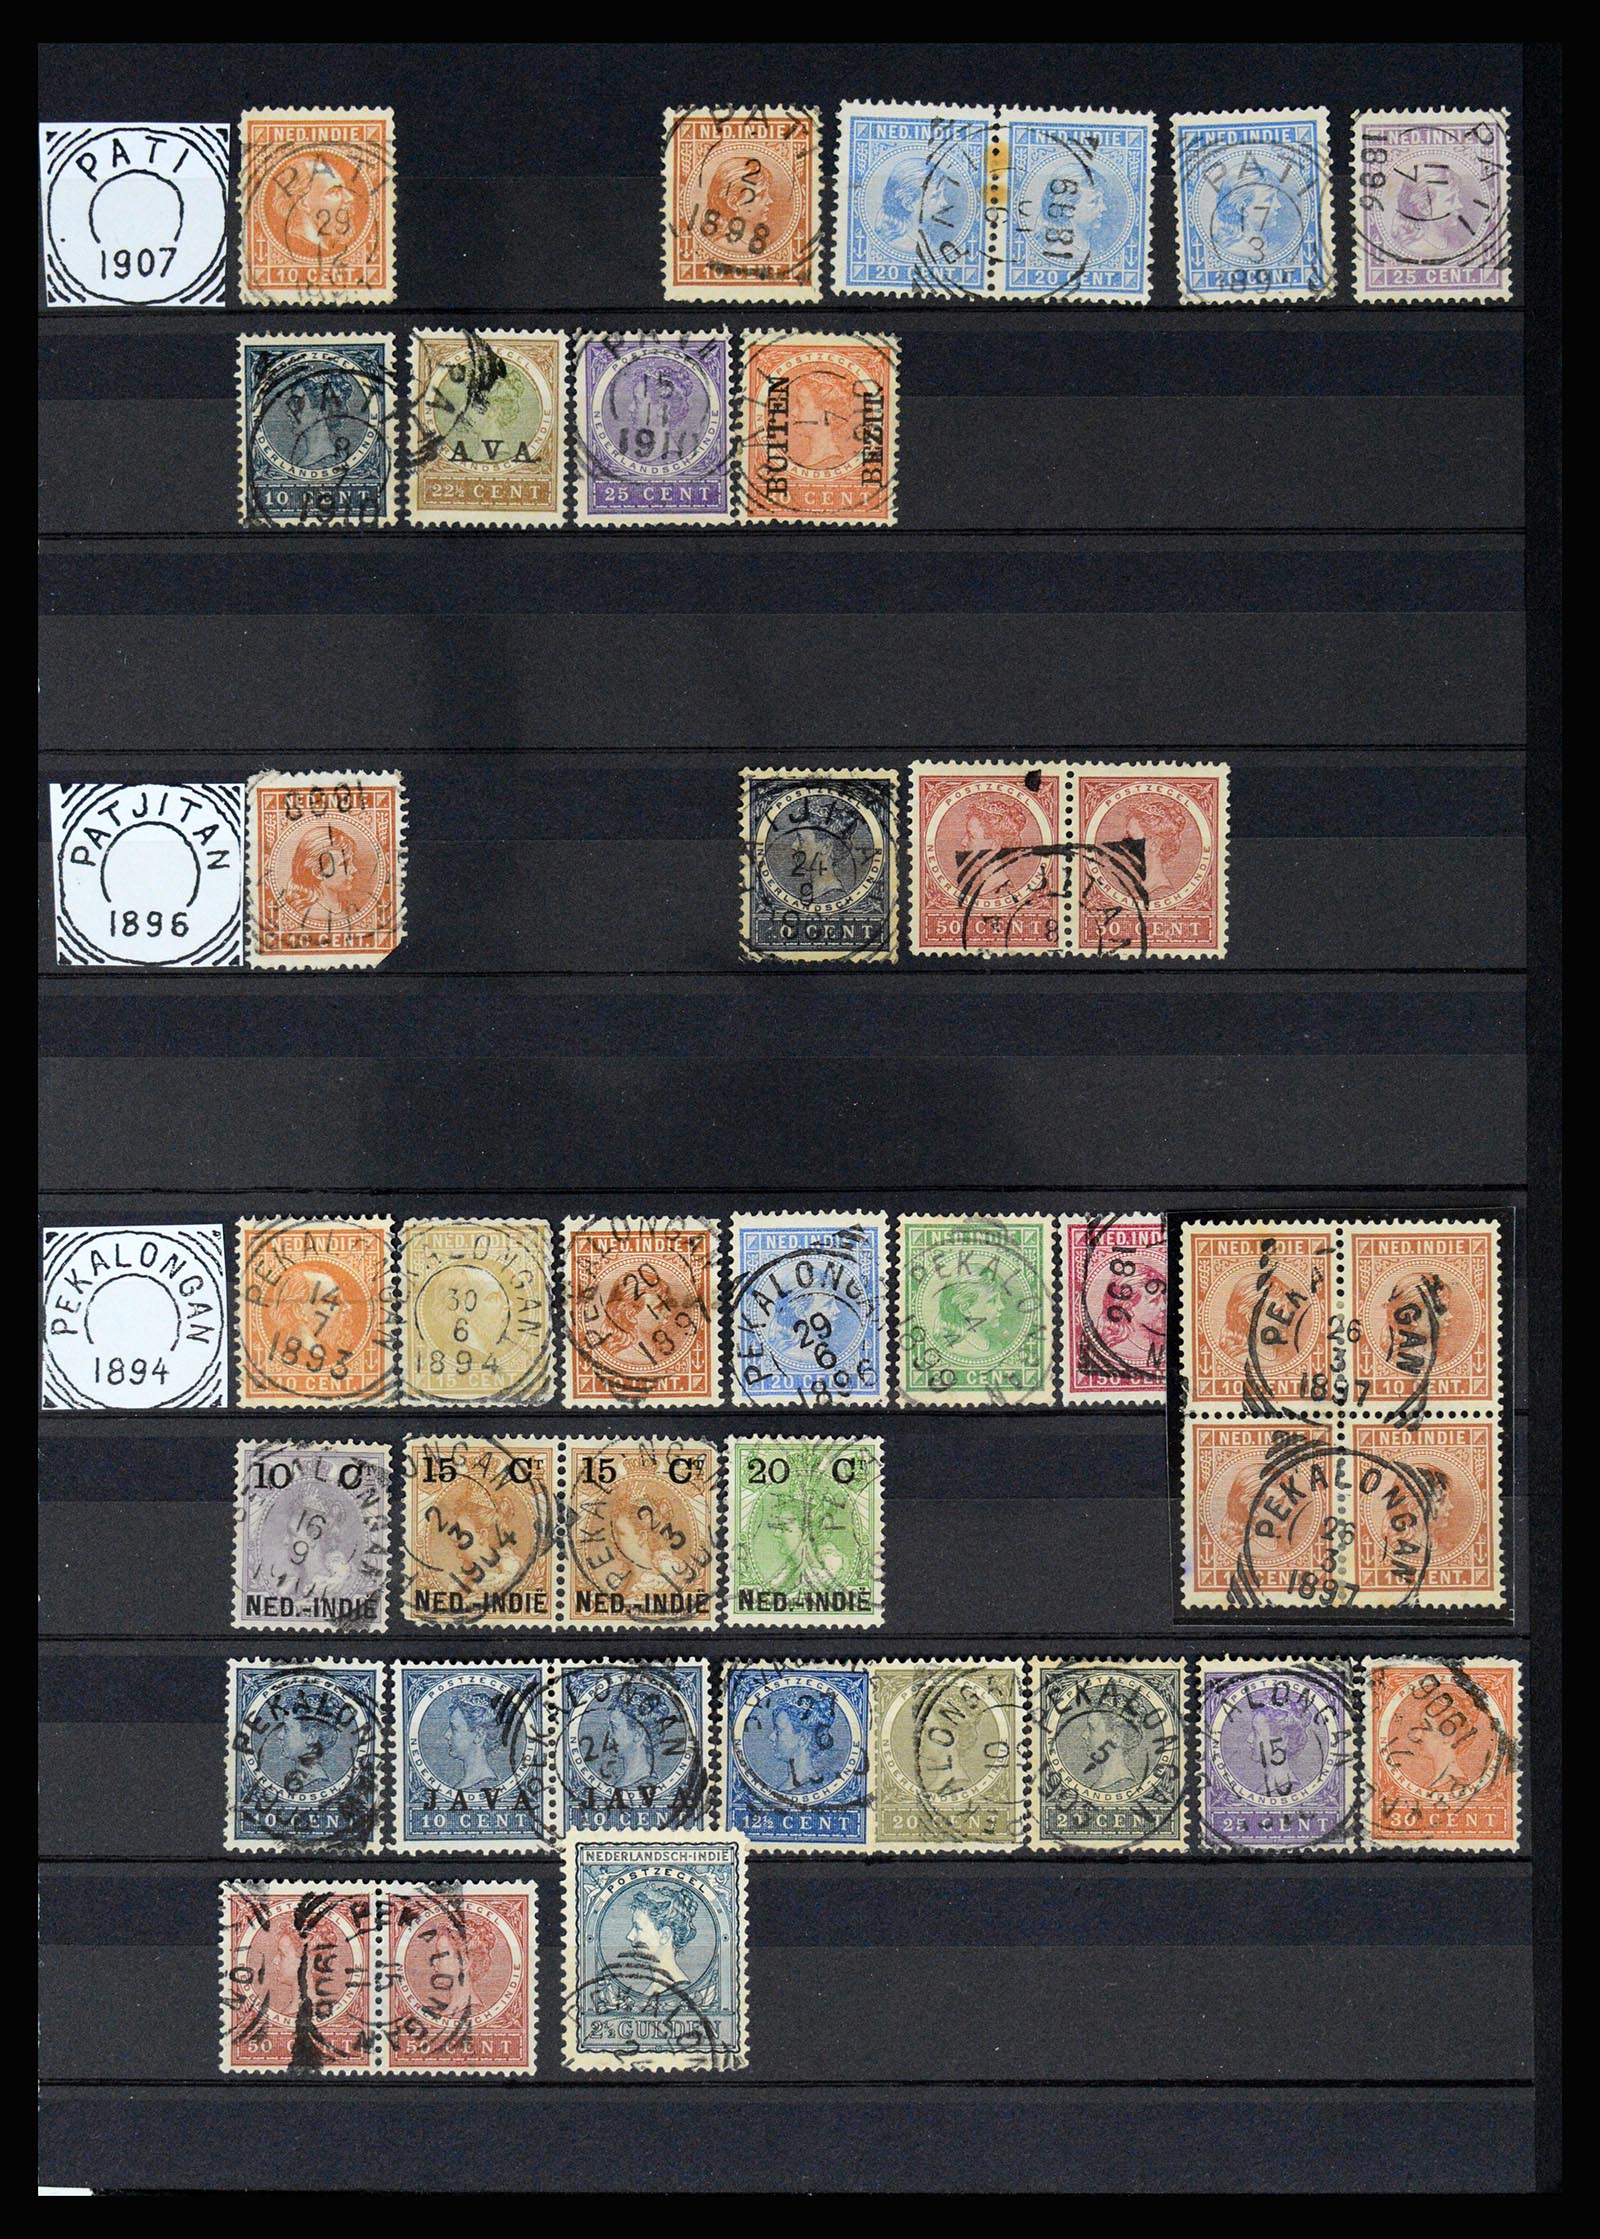 36839 038 - Stamp collection 36839 Dutch east Indies square cancels.